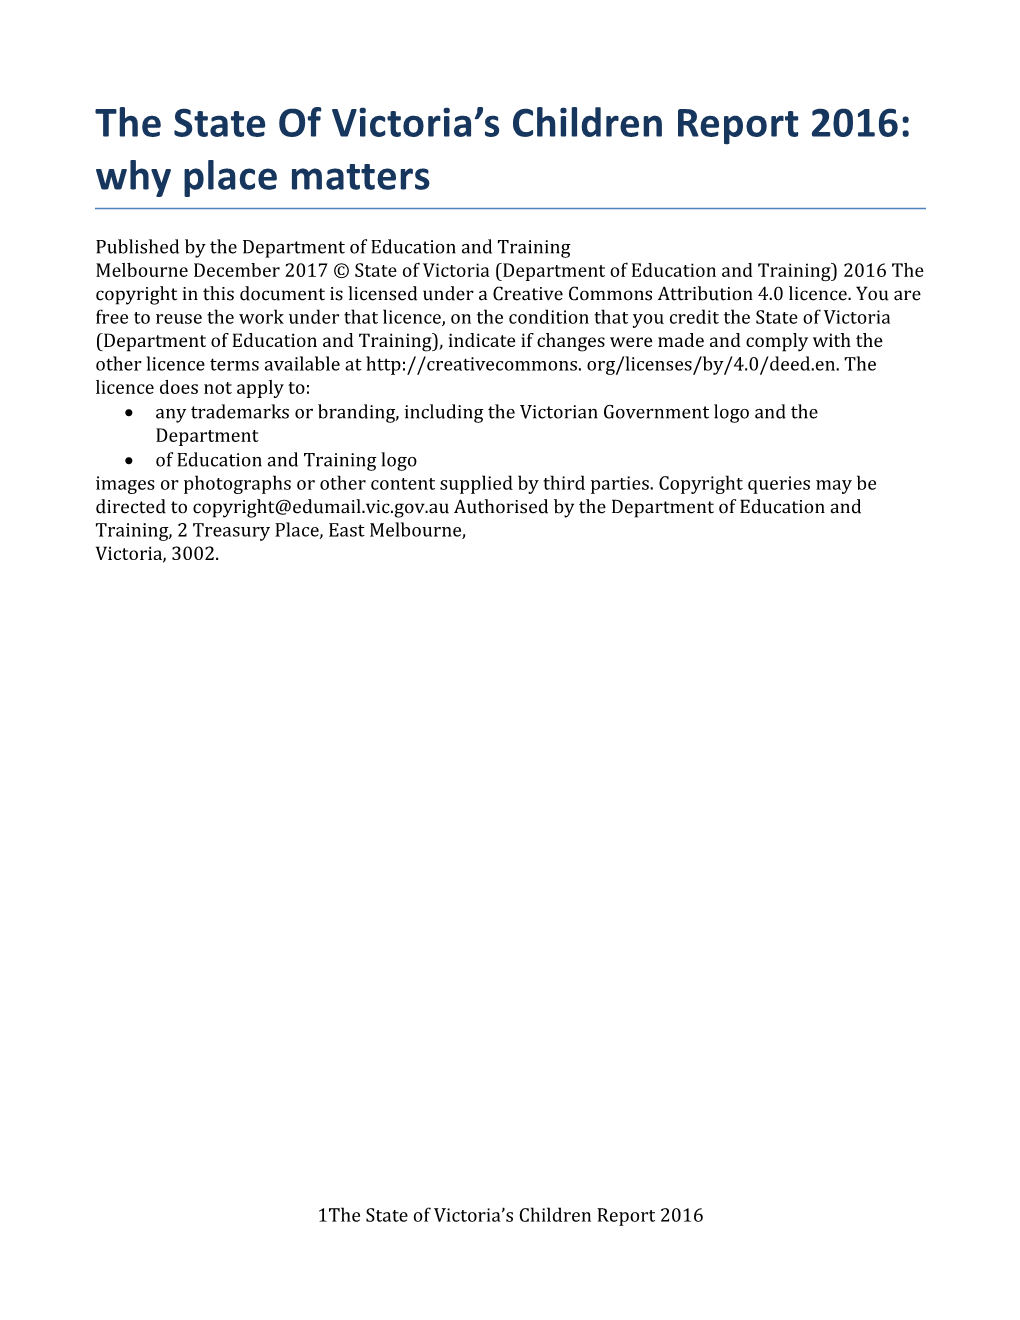 The State of Victoria S Children Report 2016: Why Place Matters